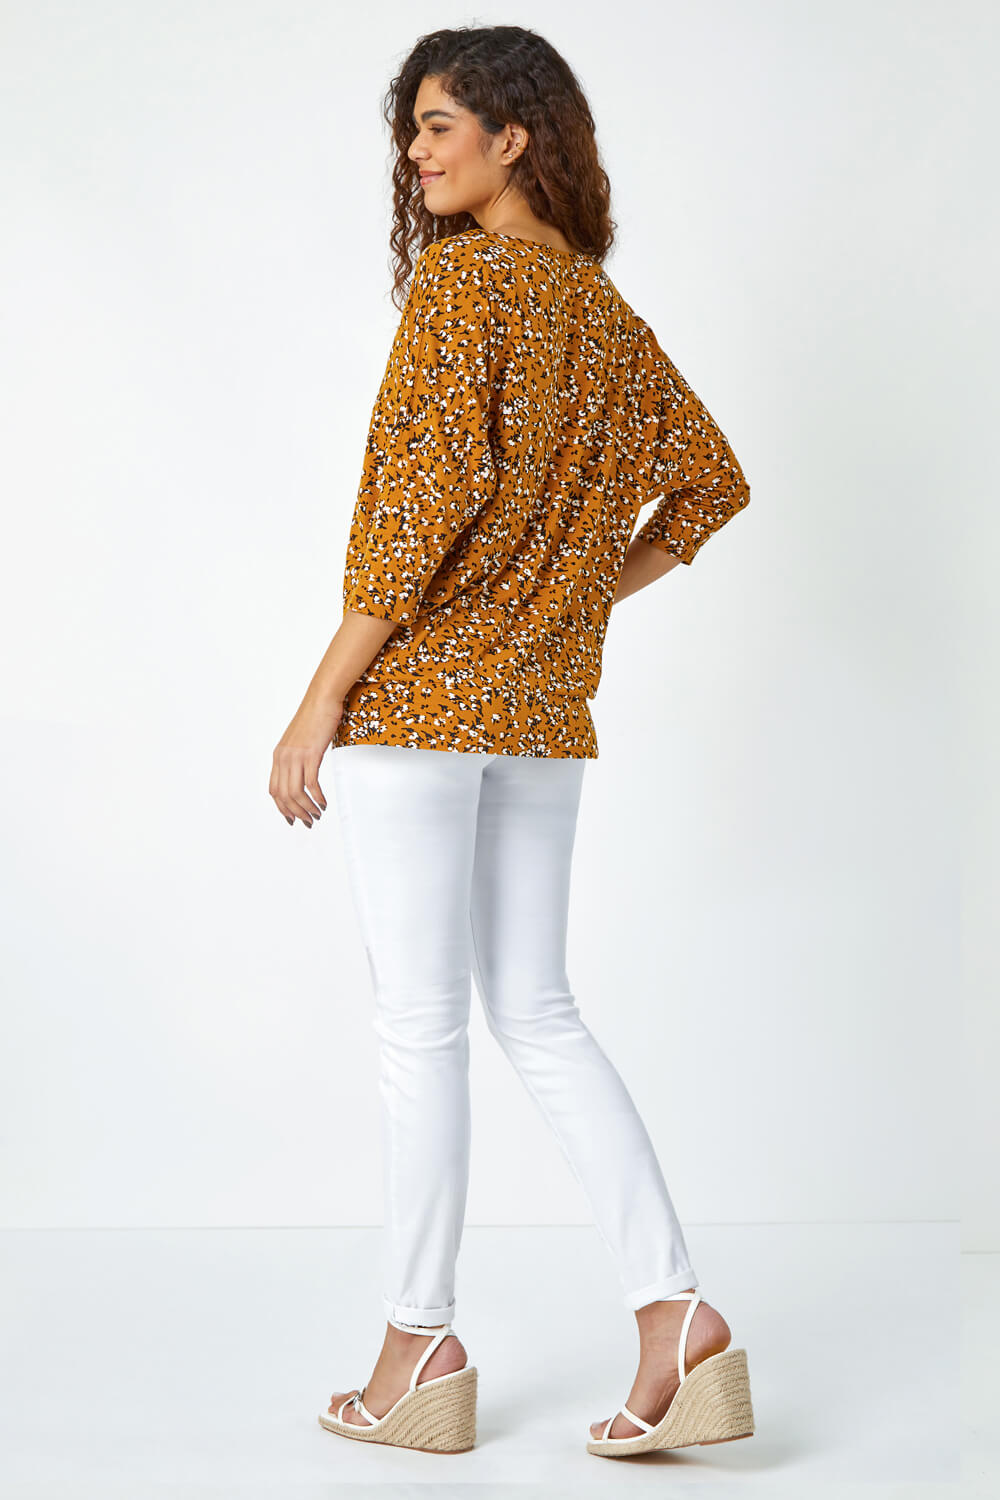 Ochre Ditsy Floral Stretch Blouson Top, Image 3 of 5